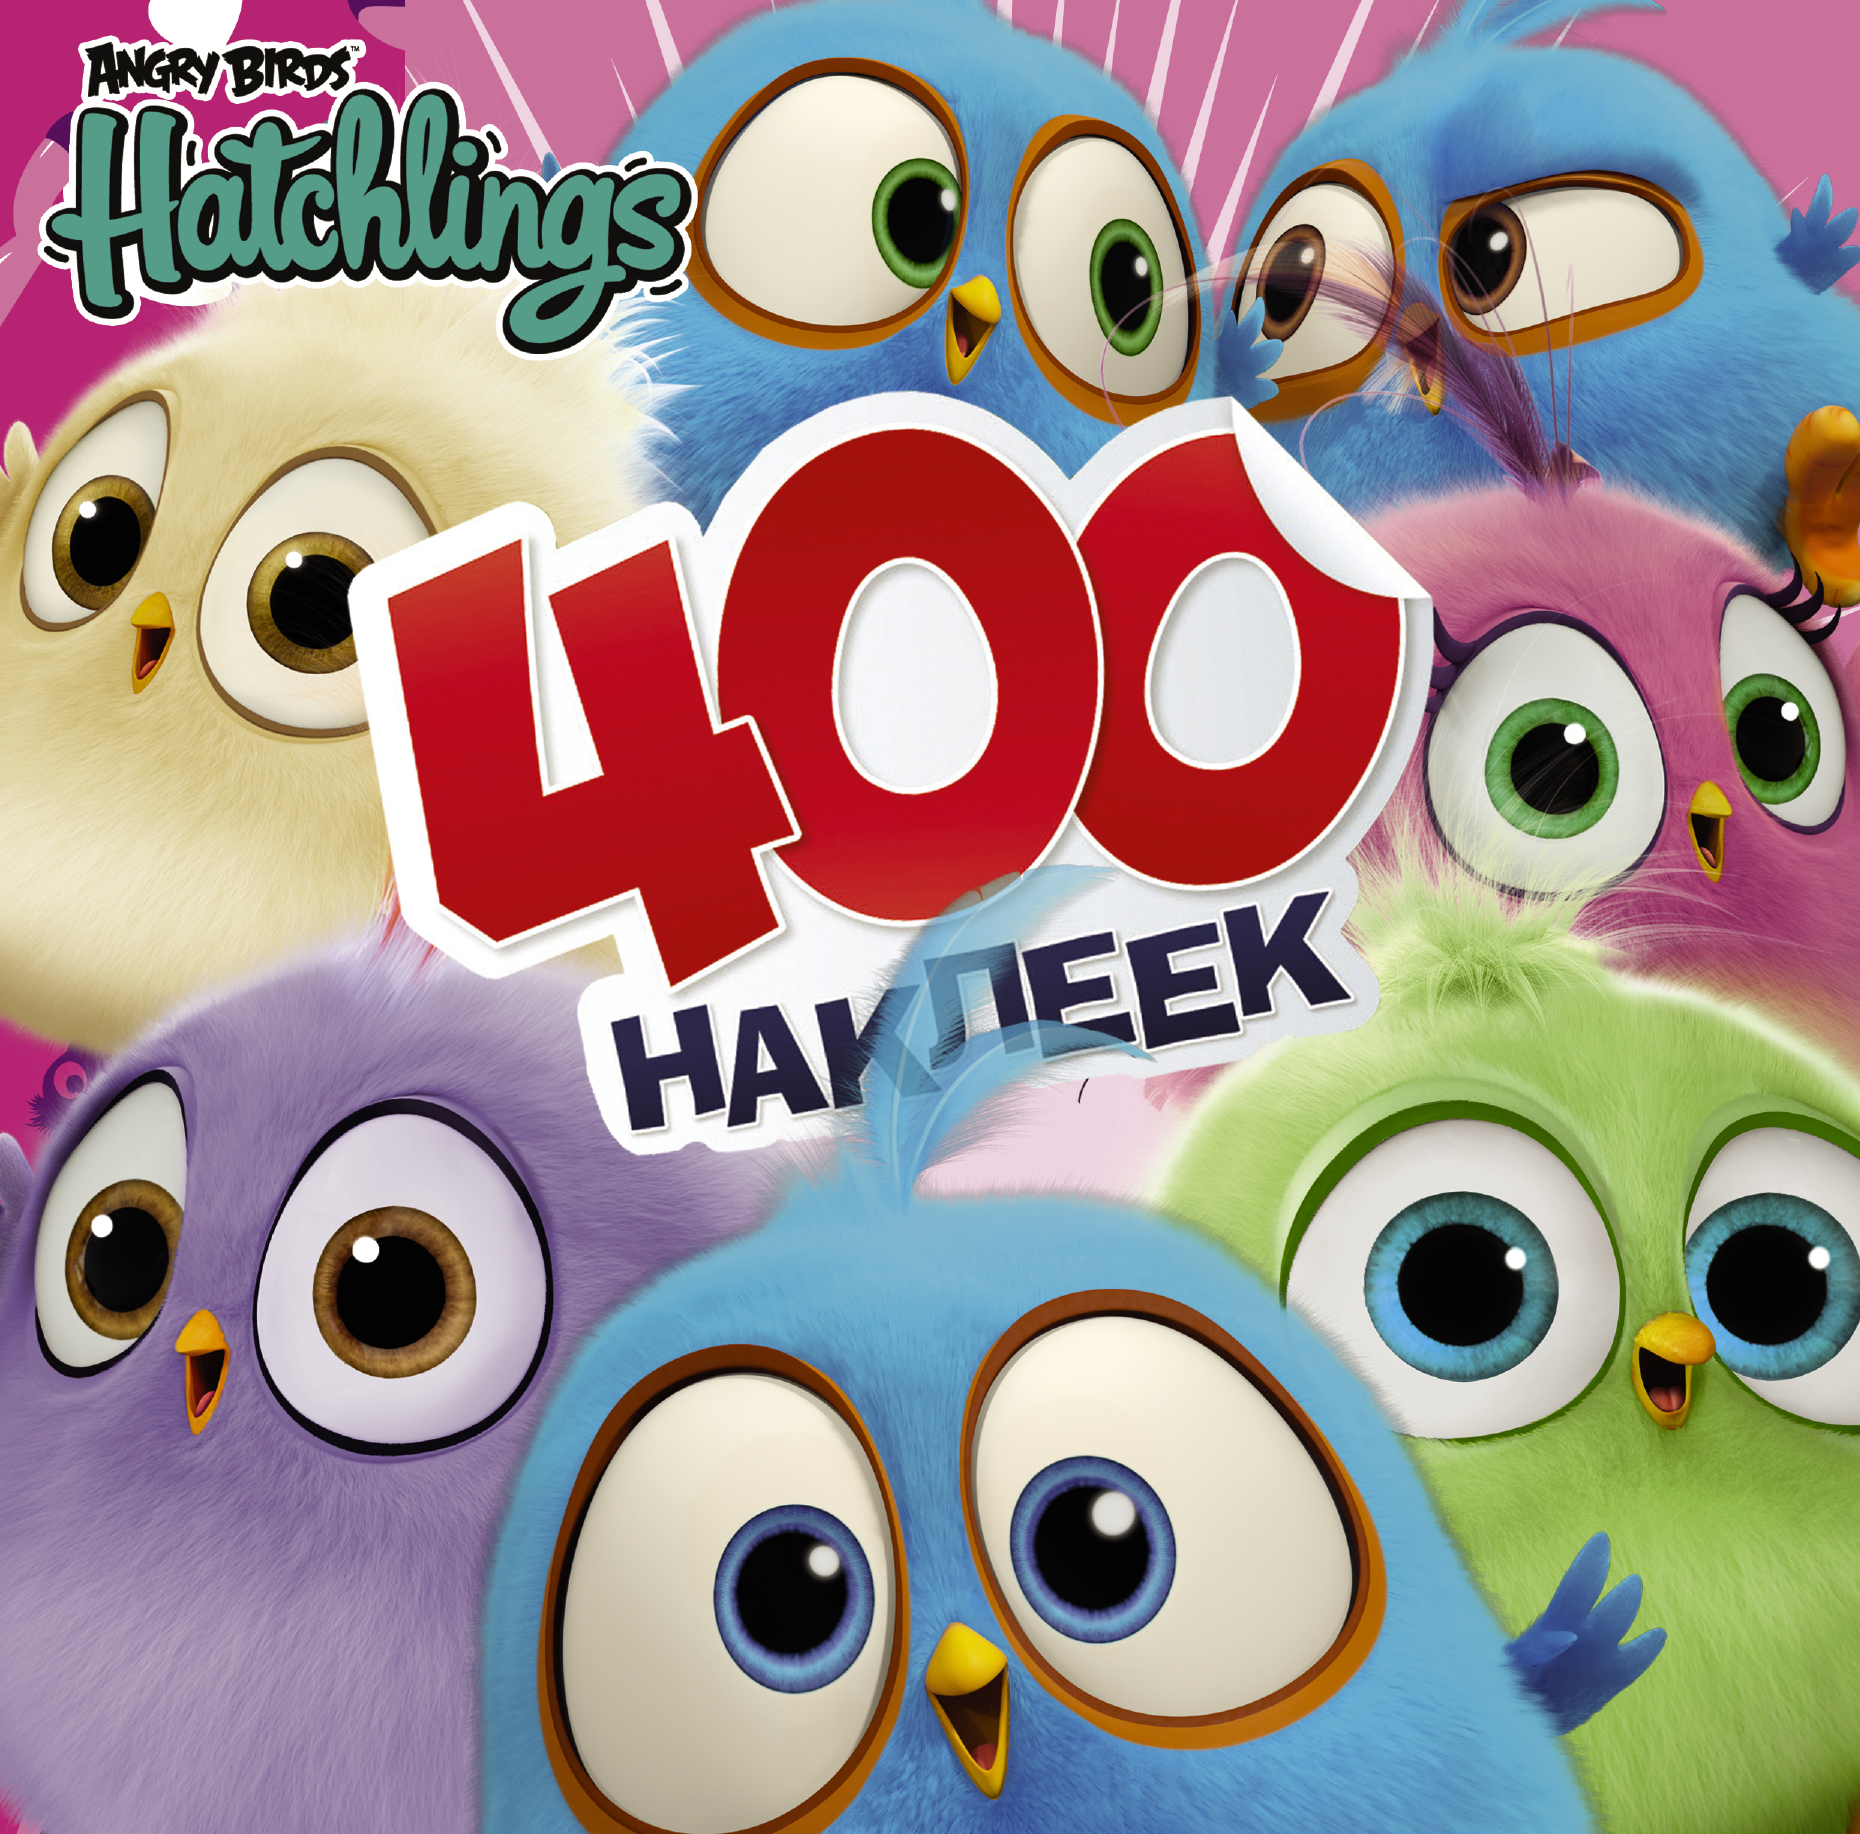 Angry Birds. Hatchlings. 400 